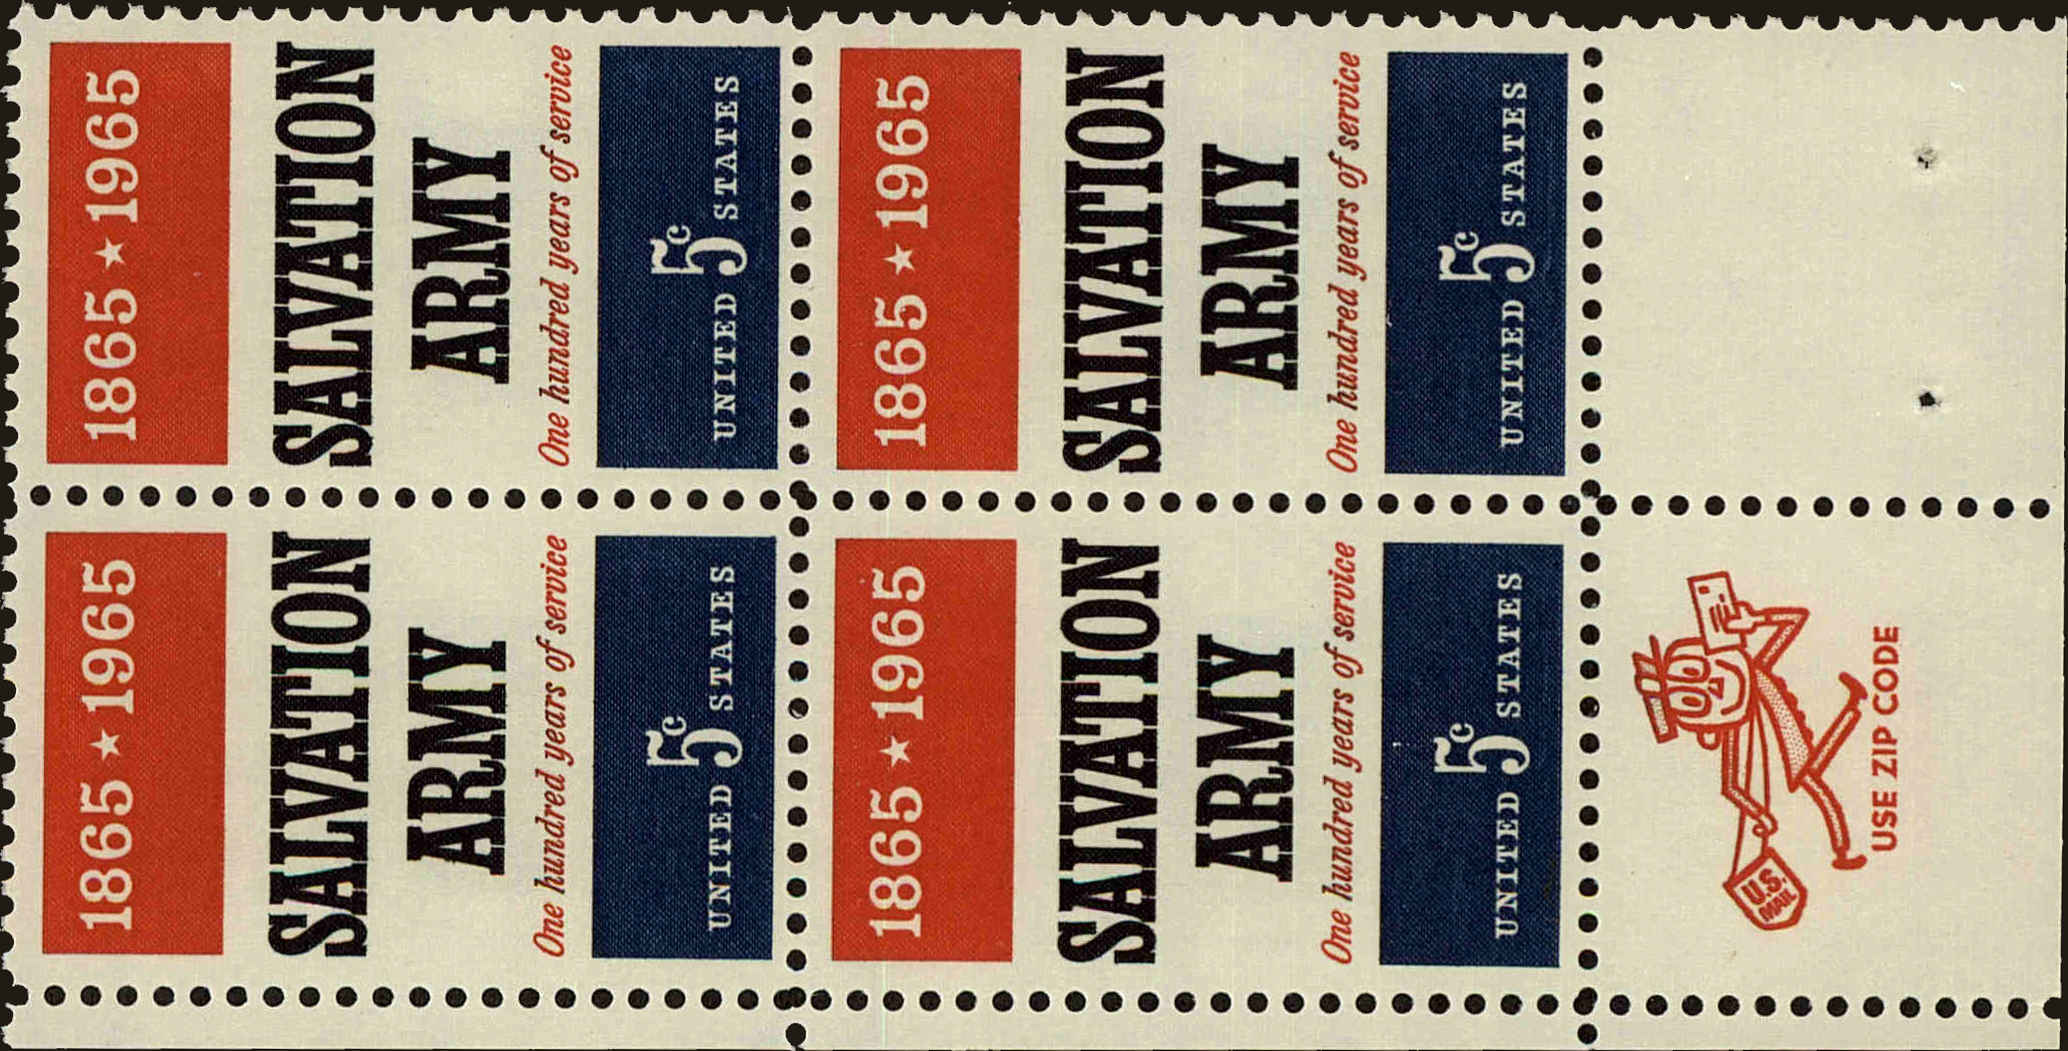 Front view of United States 1267 collectors stamp